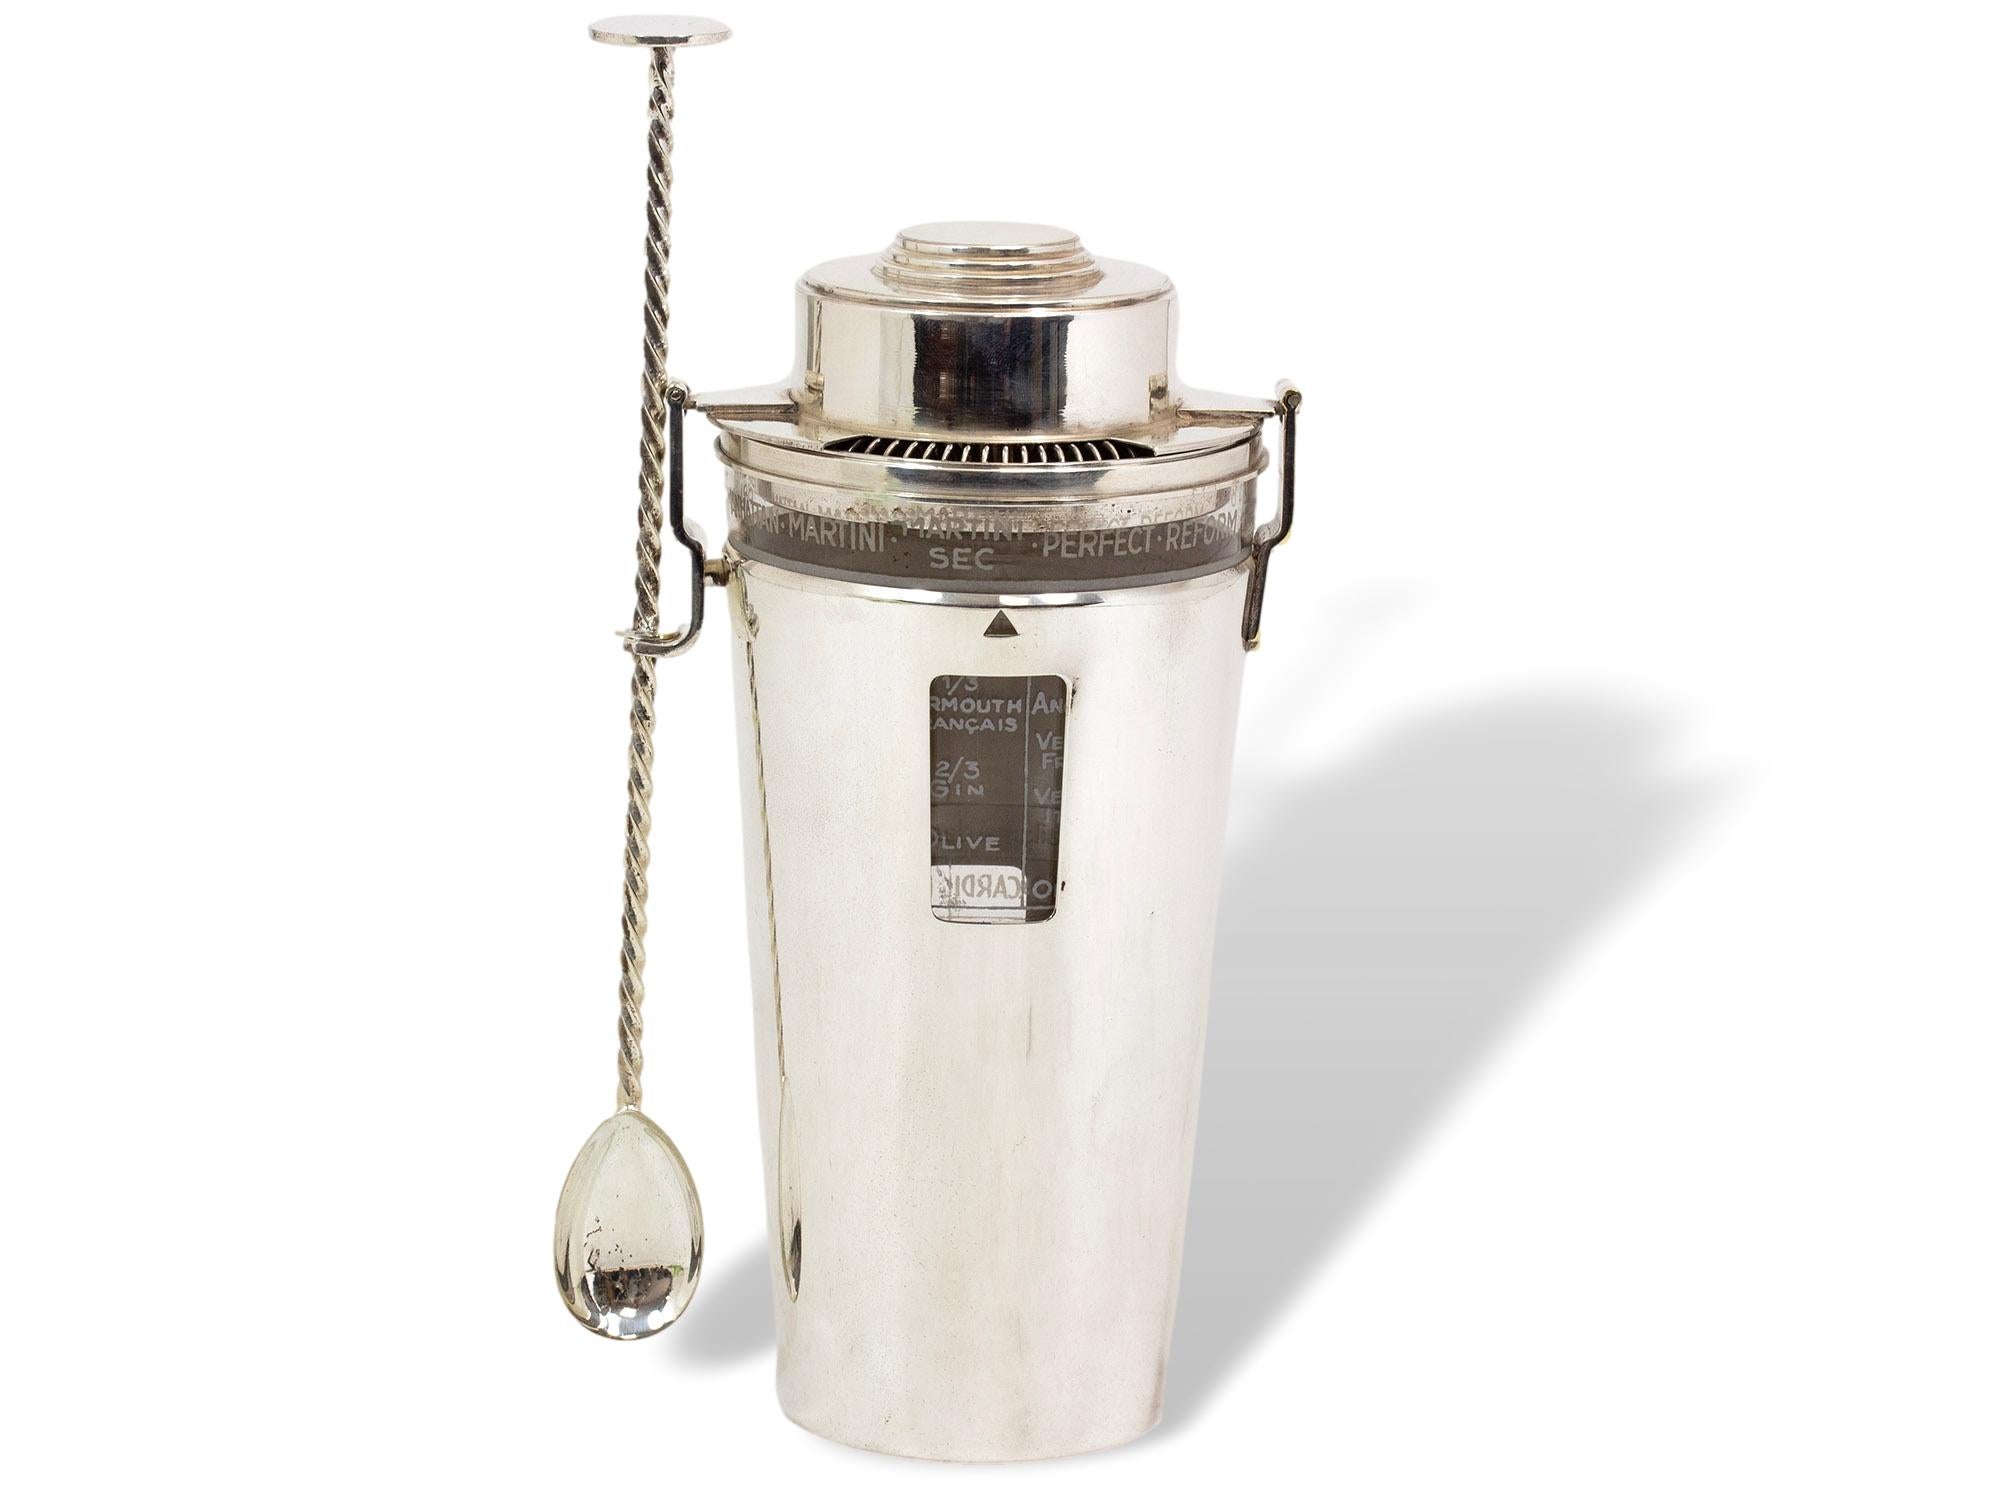 Made in France

From our Barware collection, we are thrilled to offer The Barman Art Deco Cocktail Shaker. The Cocktail shaker plated in Silver with an outer body with two windows to see each recipe, glass liner with etched recipes to the body,